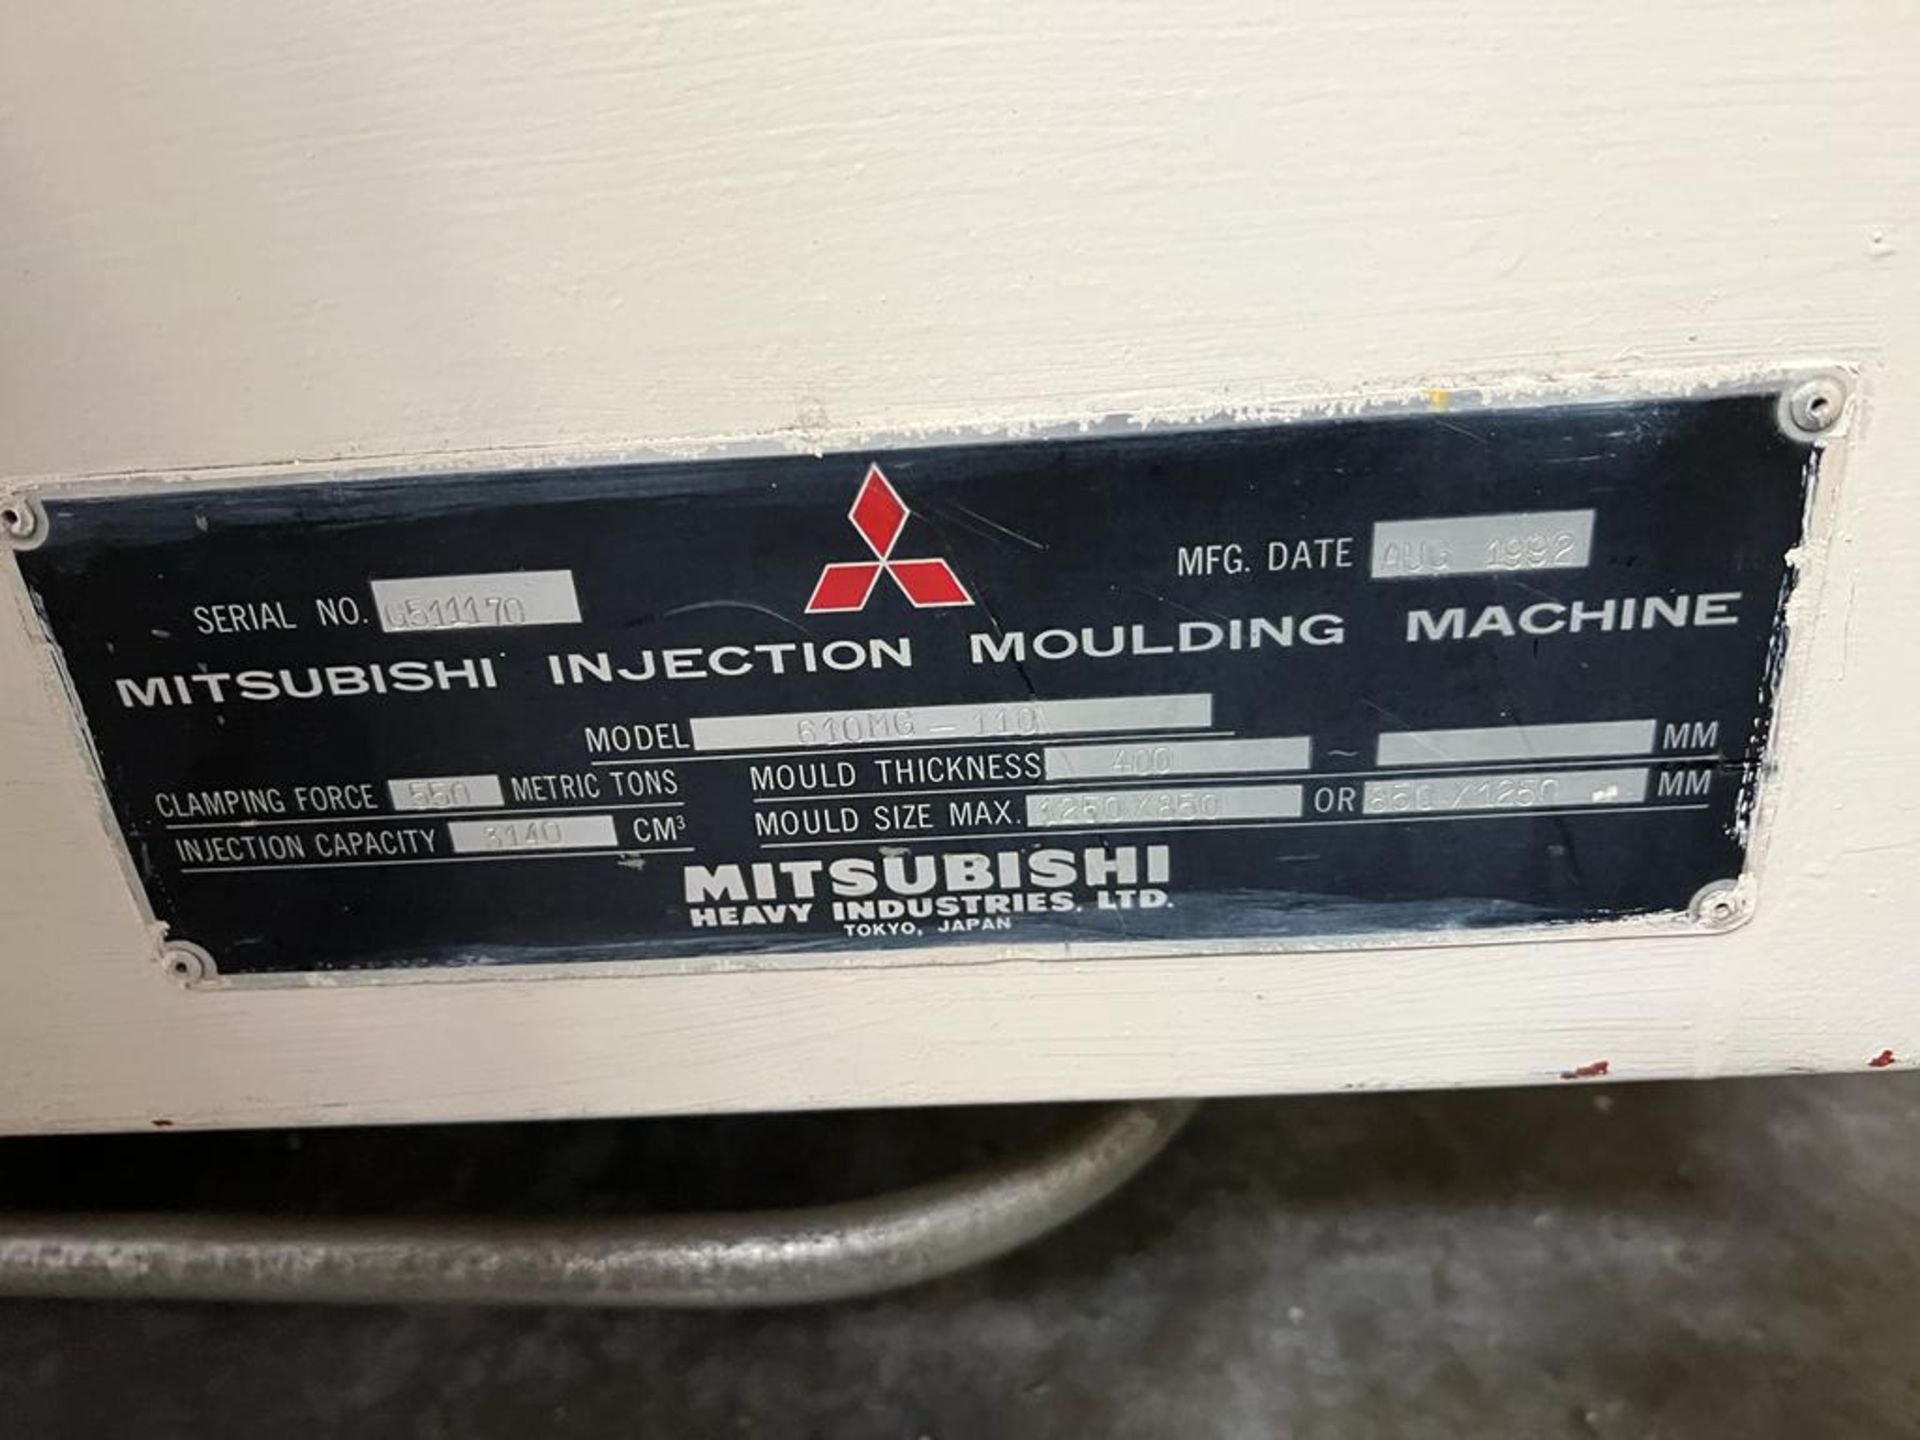 1992 MITSUBISHI MODEL 610MG-110, 610 TON PLASTIC INJECTION MOLDER, 191.6 SHOT SIZE, SOLD AS-IS - Image 14 of 14